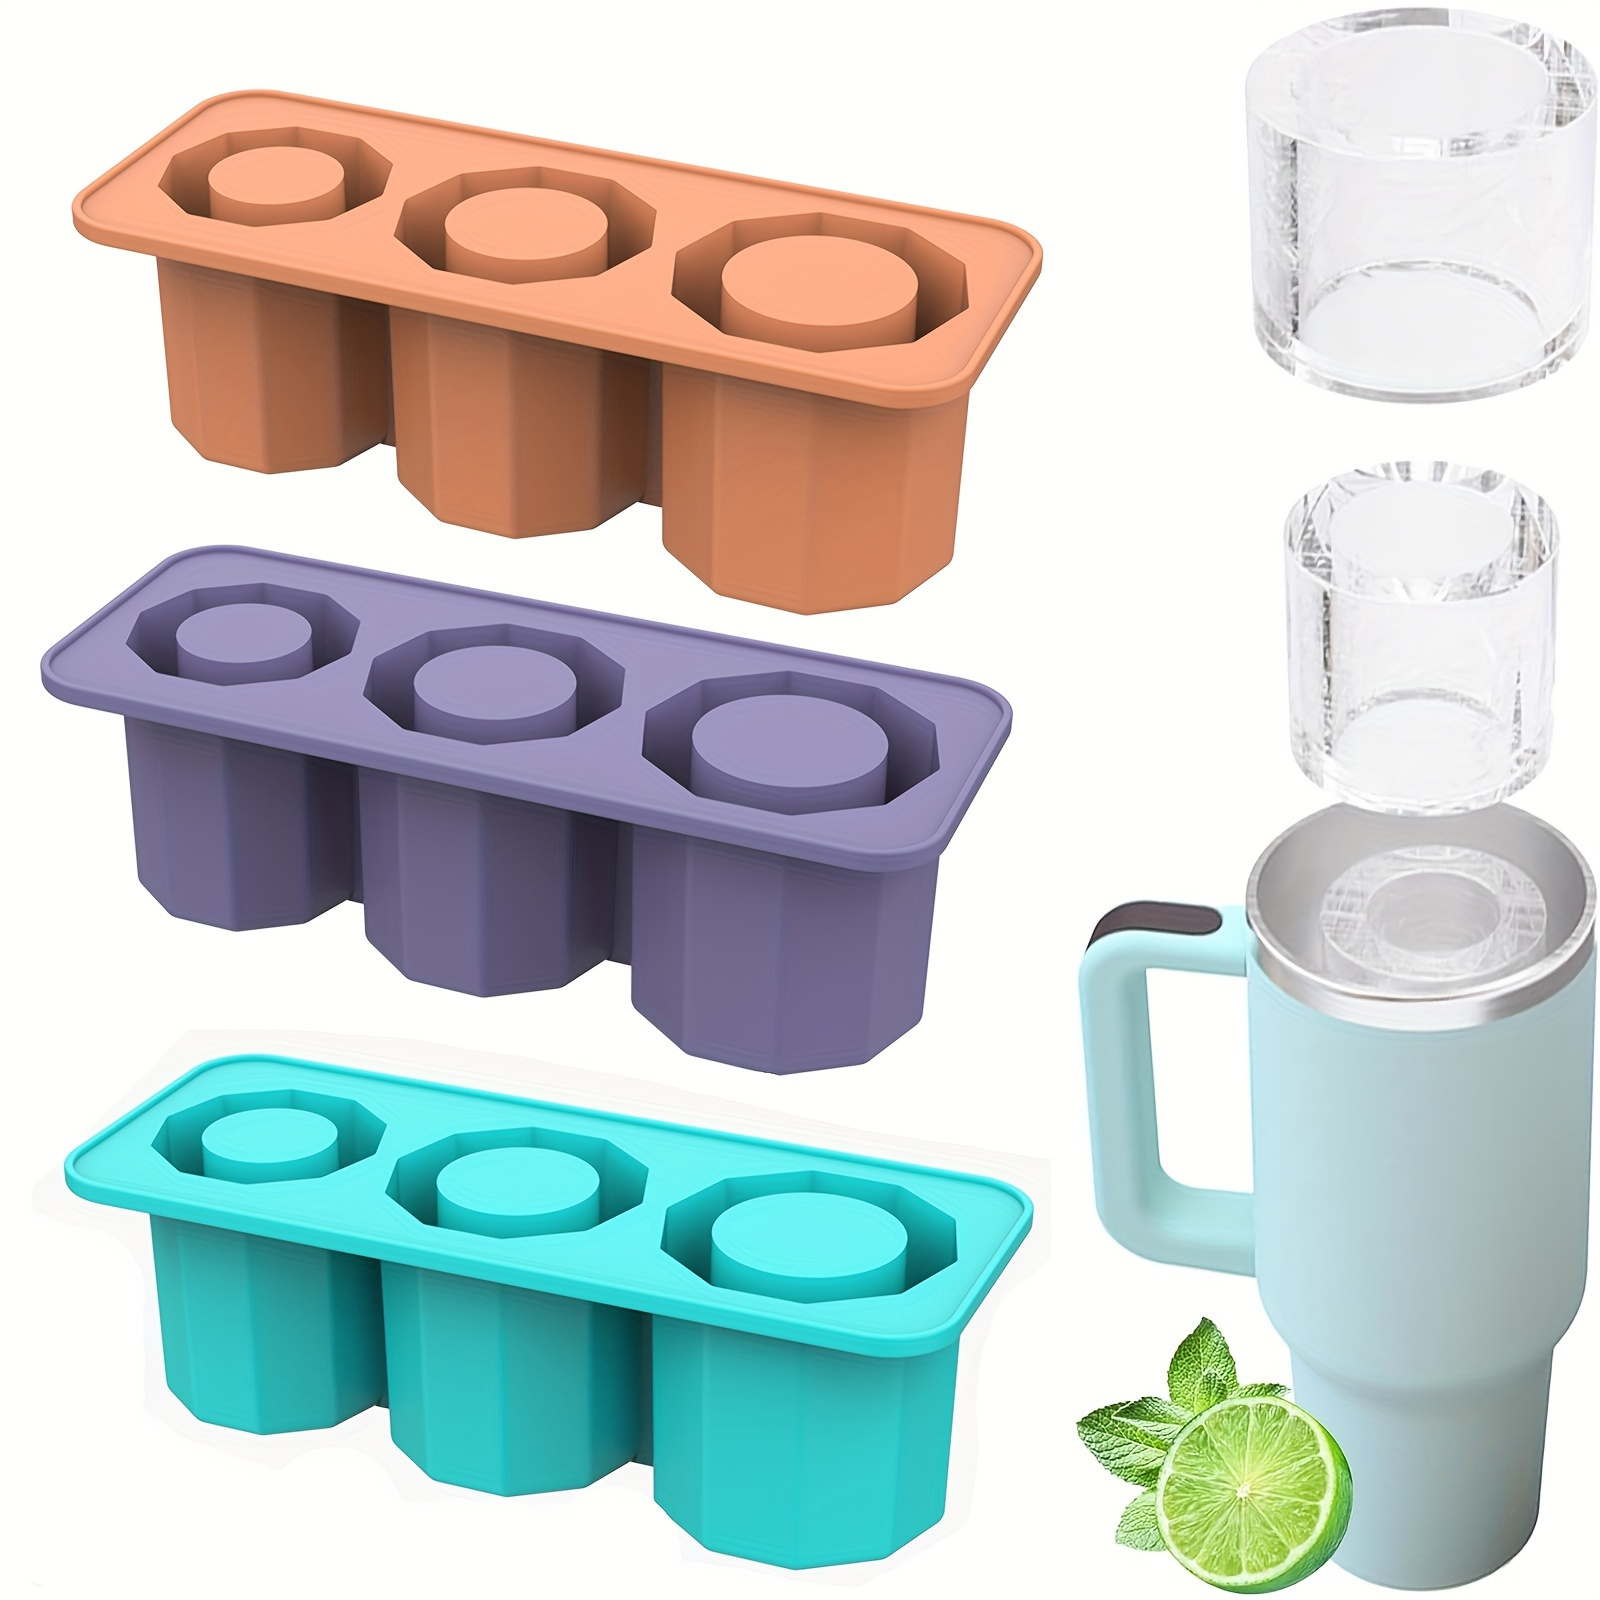 

safe-material" Cup Compatible Silicone Ice Tray - Bpa-free, Food-grade Mold For Perfect Ice Cubes